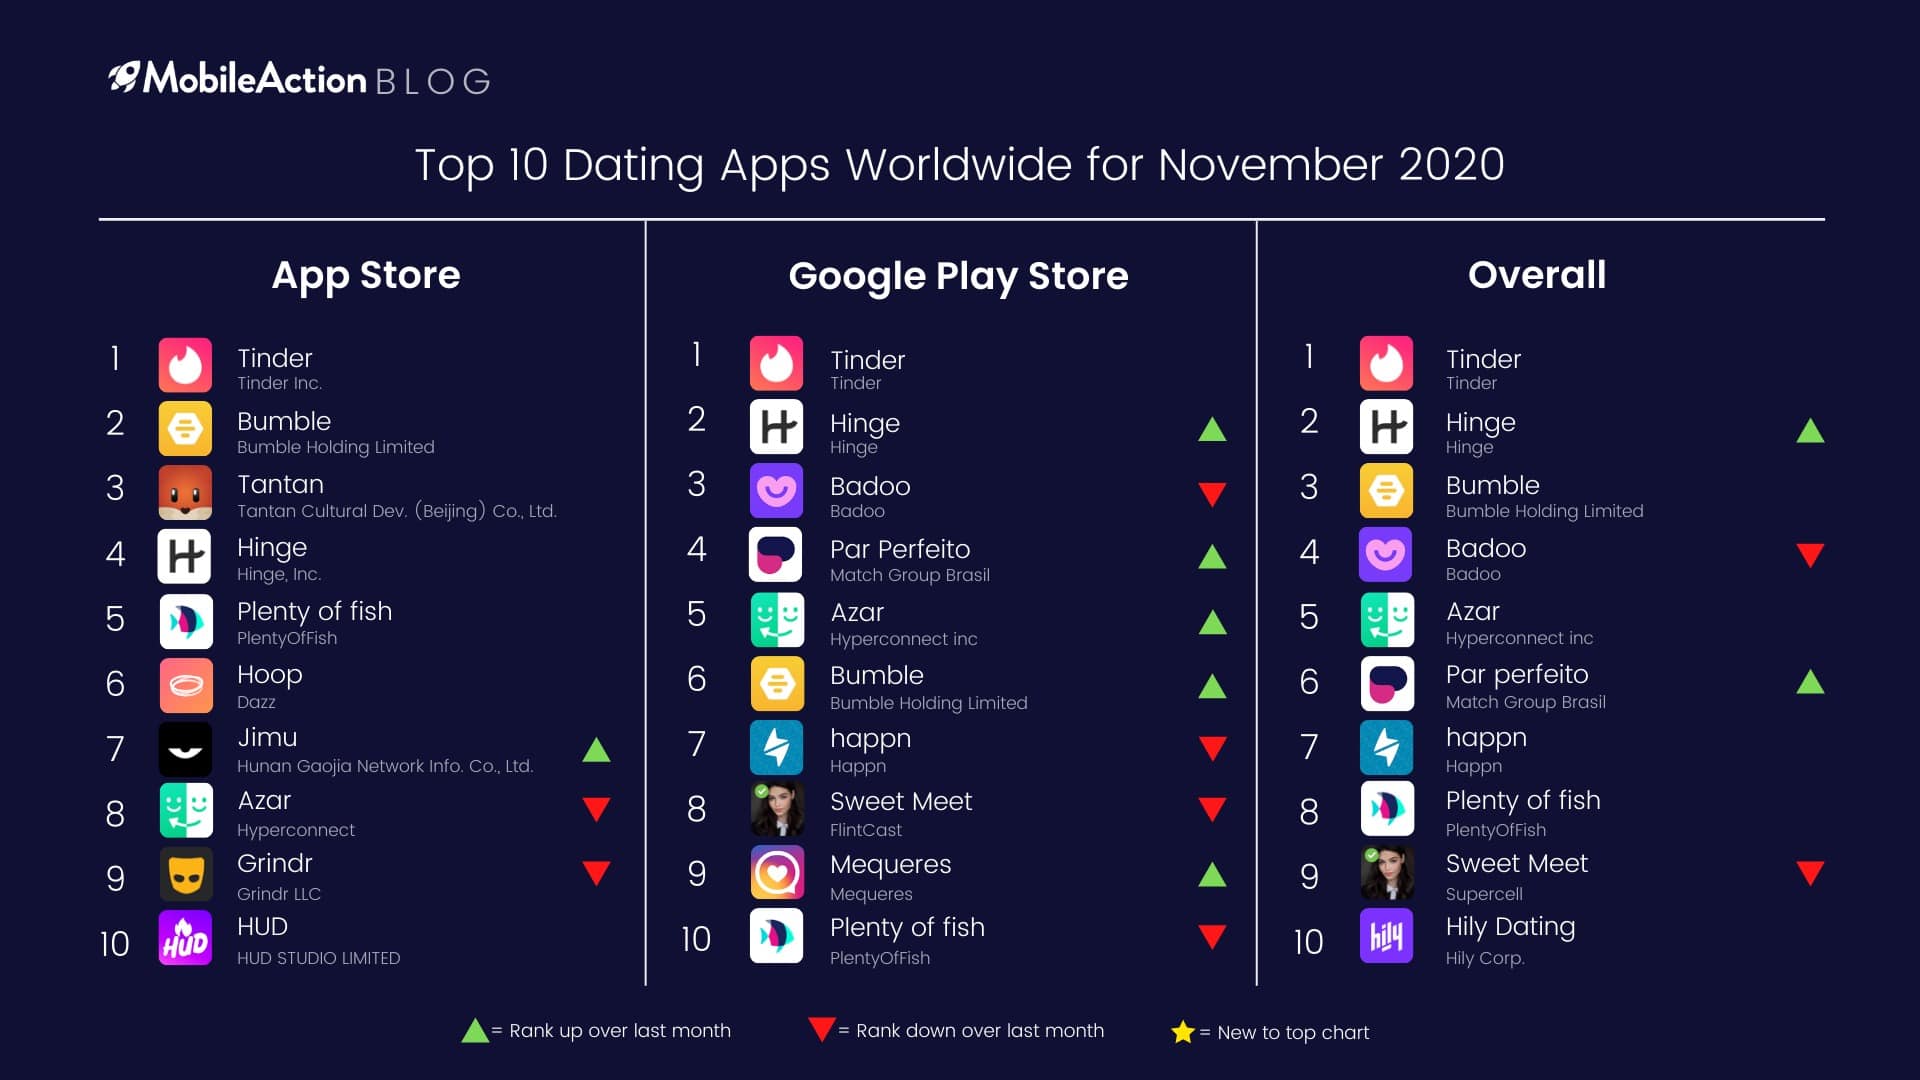 Top 10 Dating Apps Worldwide for November 2020